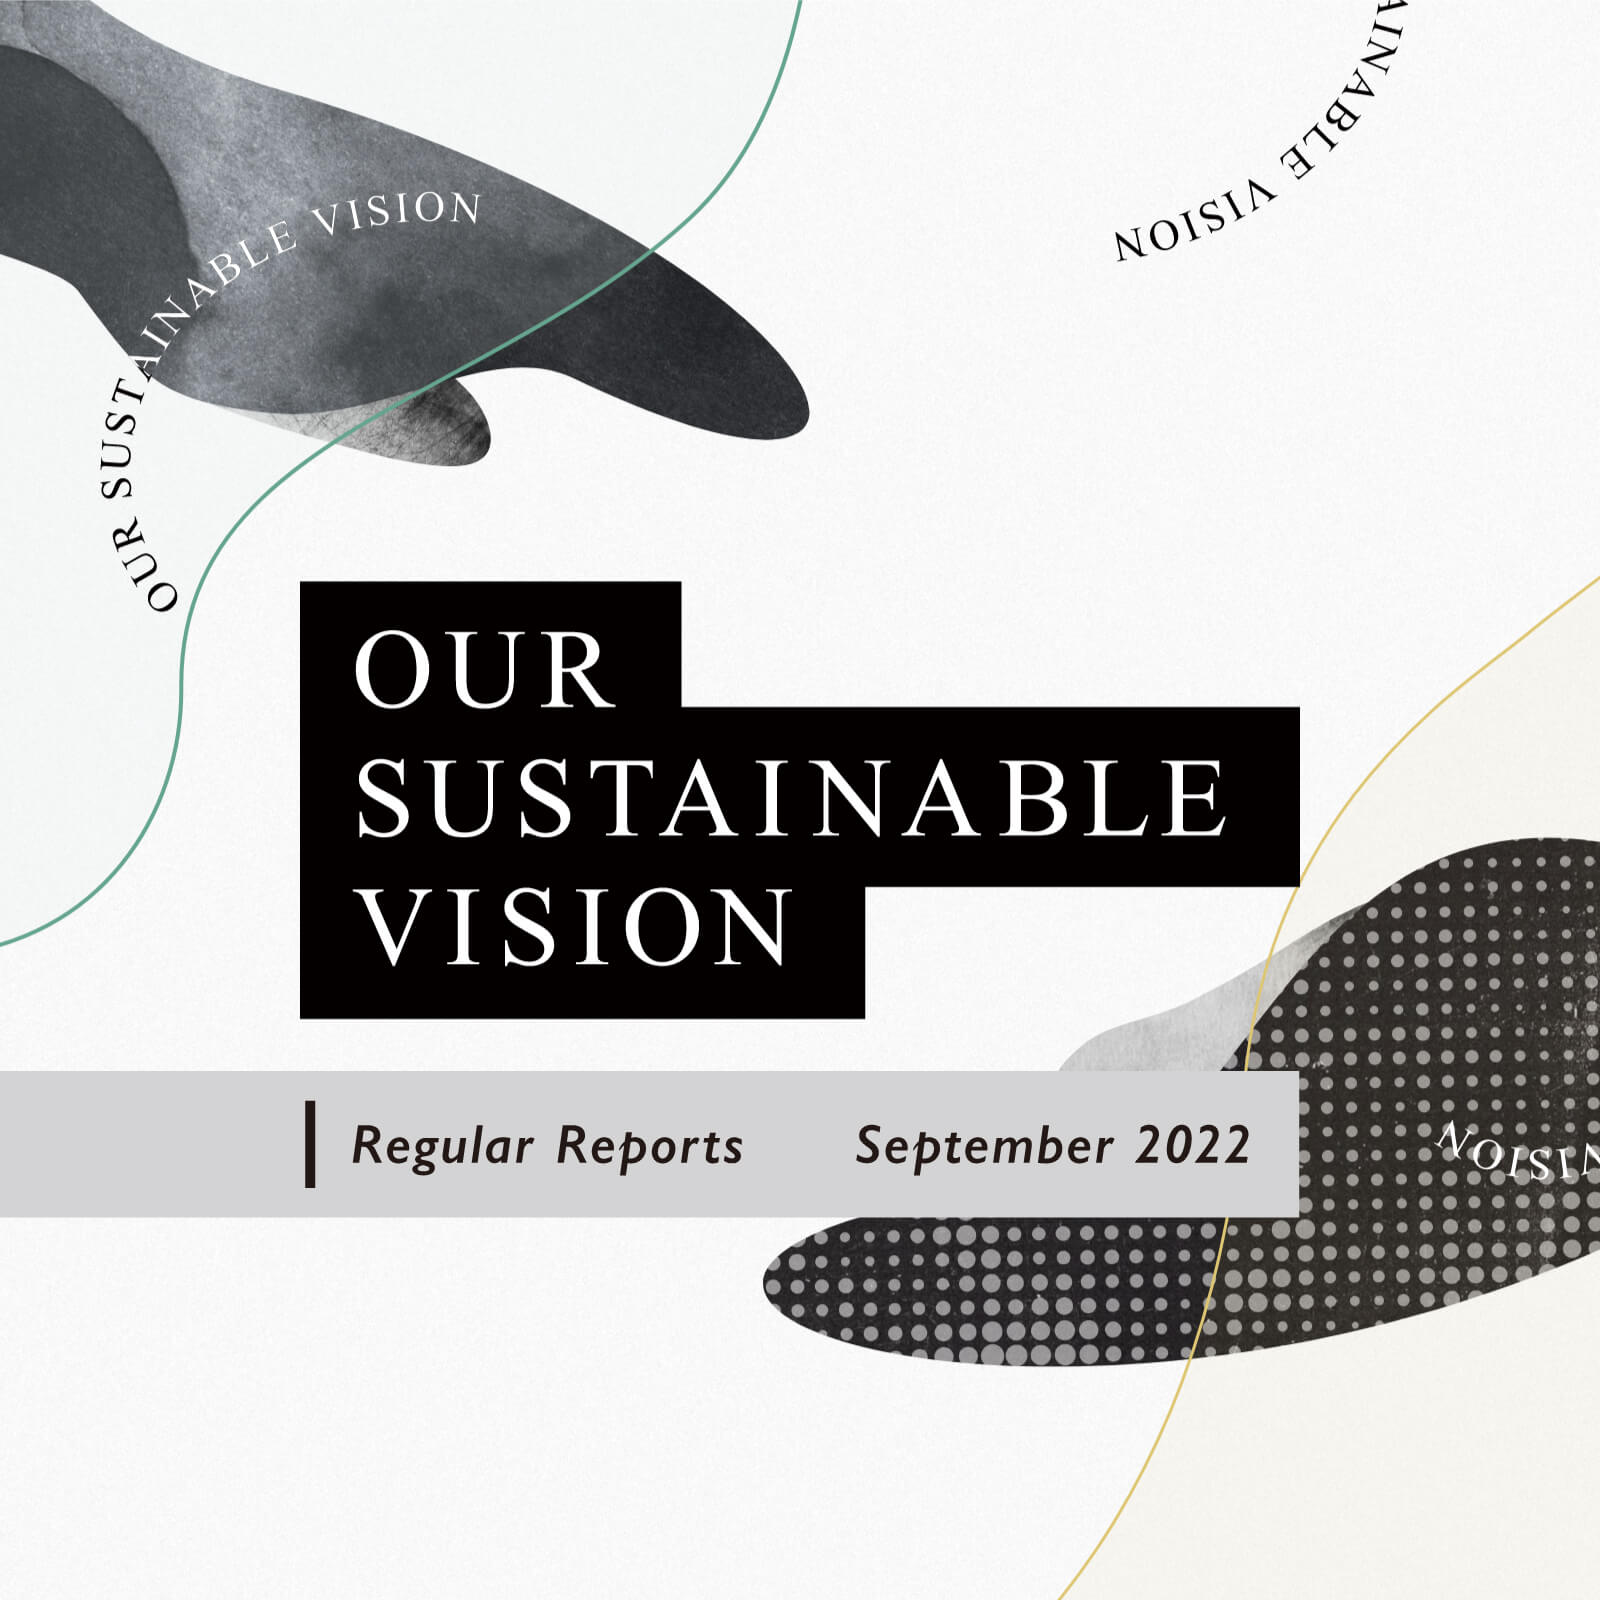 【OUR SUSTAINABLE VISION】Monthly Report_September 2022 9.28(WED.)